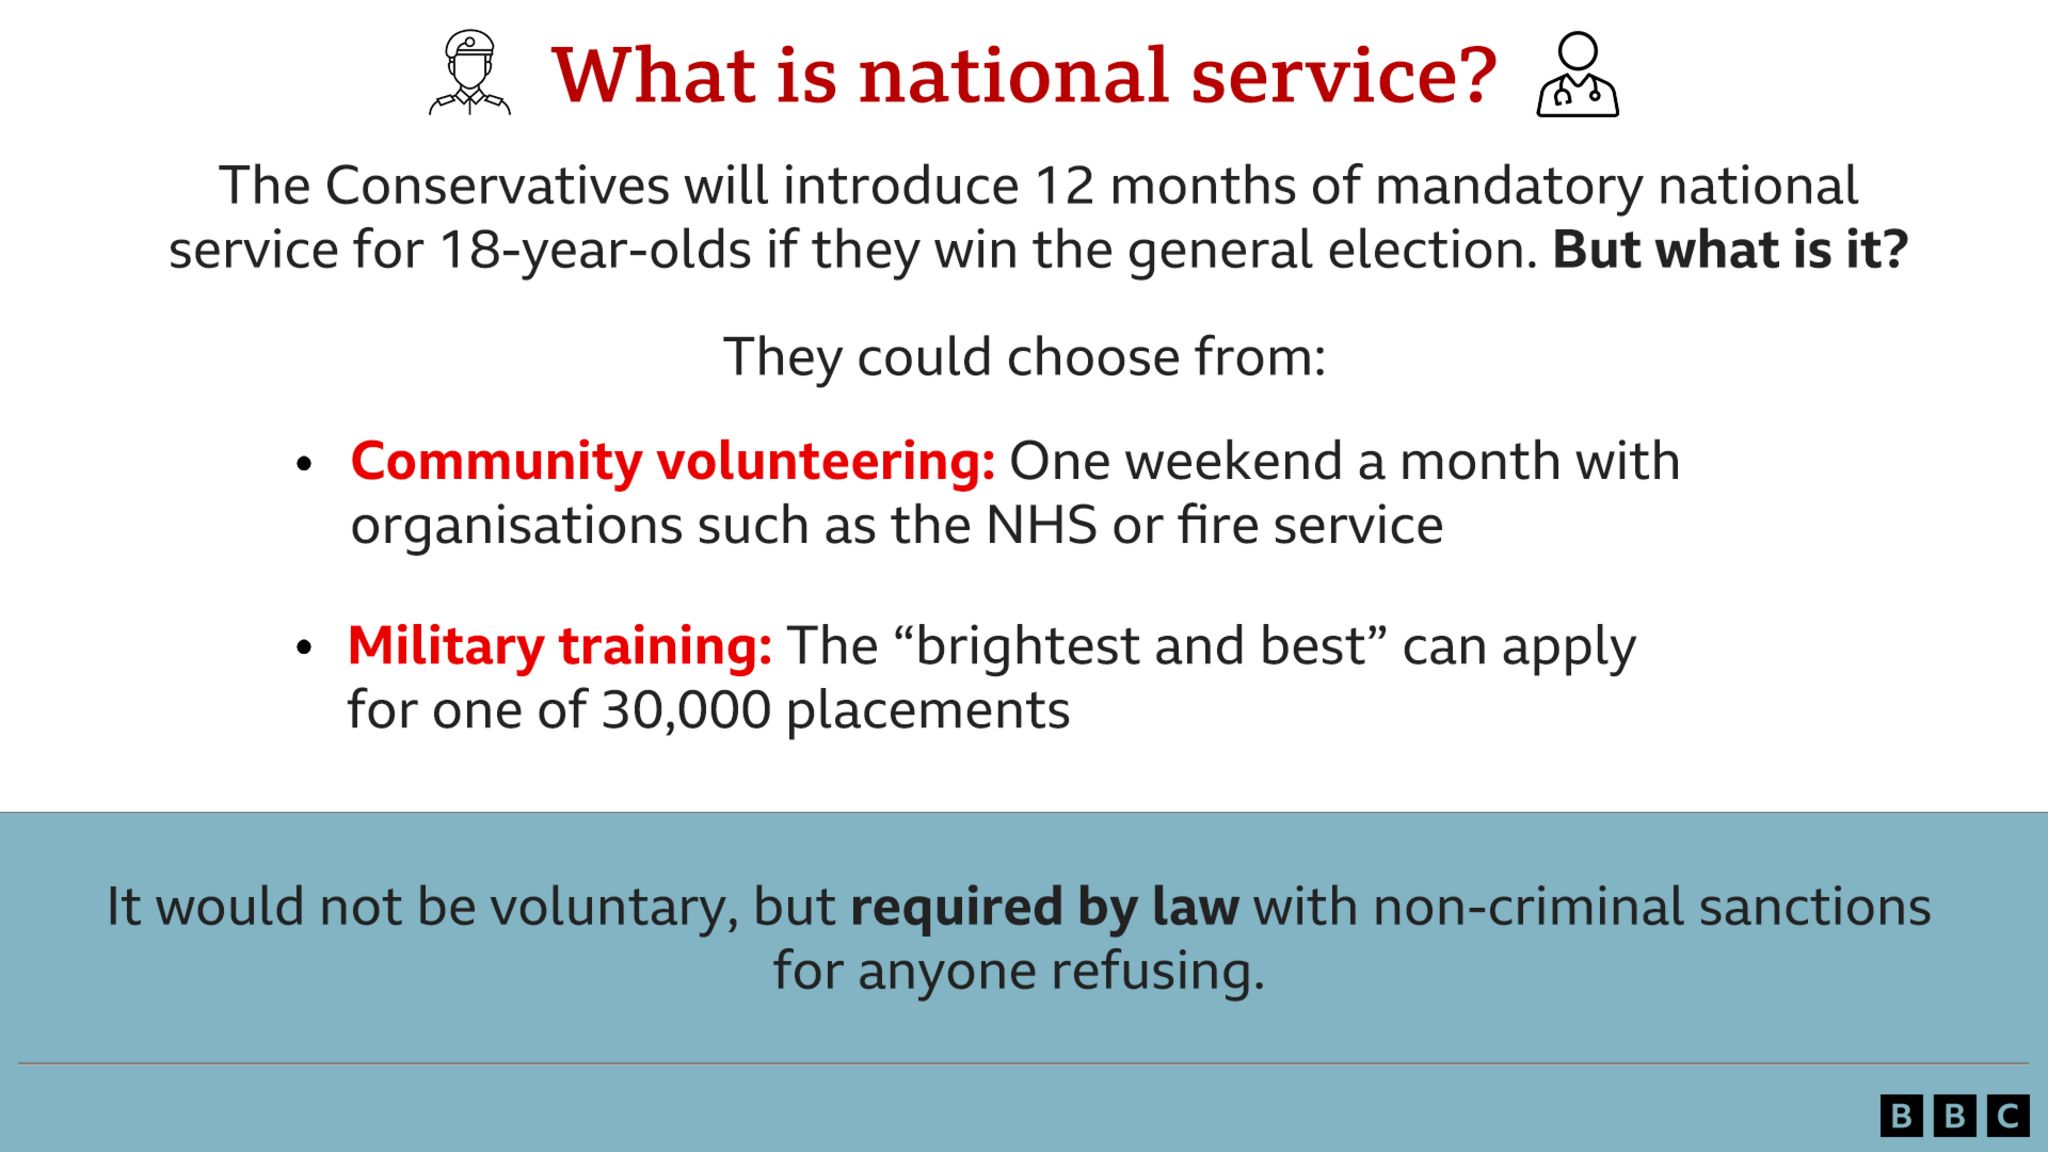 graphic about national service